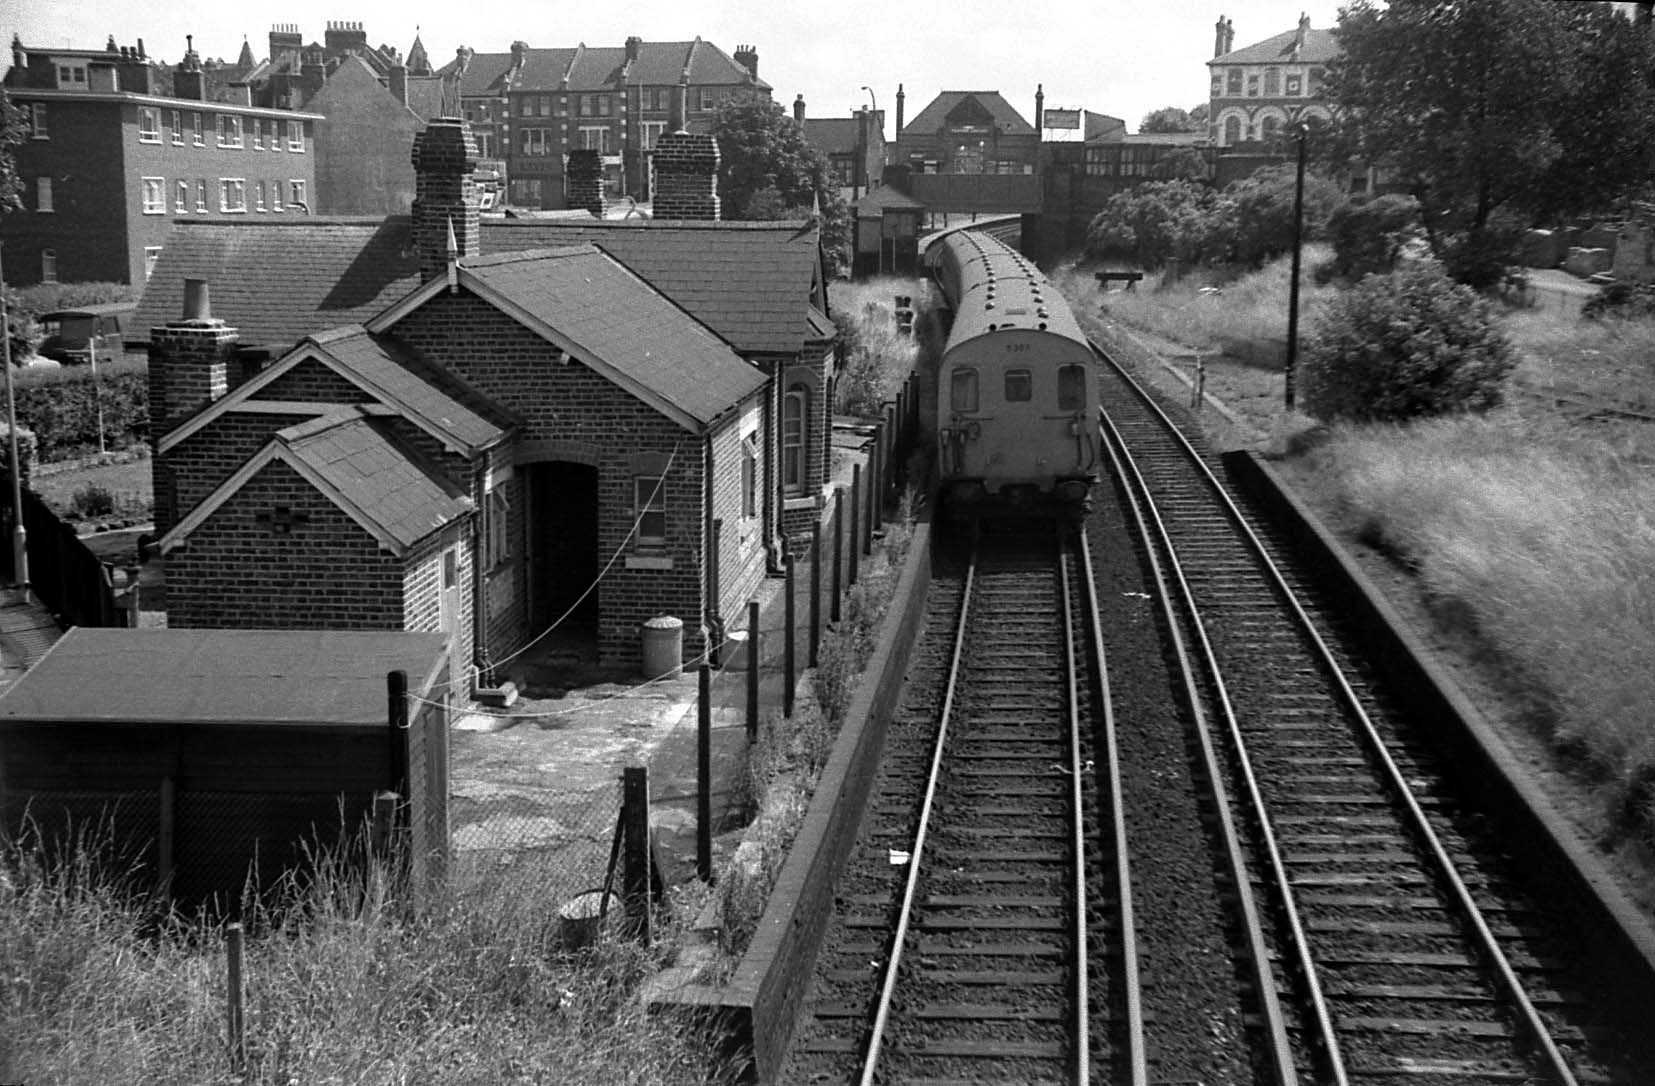 Tooting Junction Station buildings in March 1968